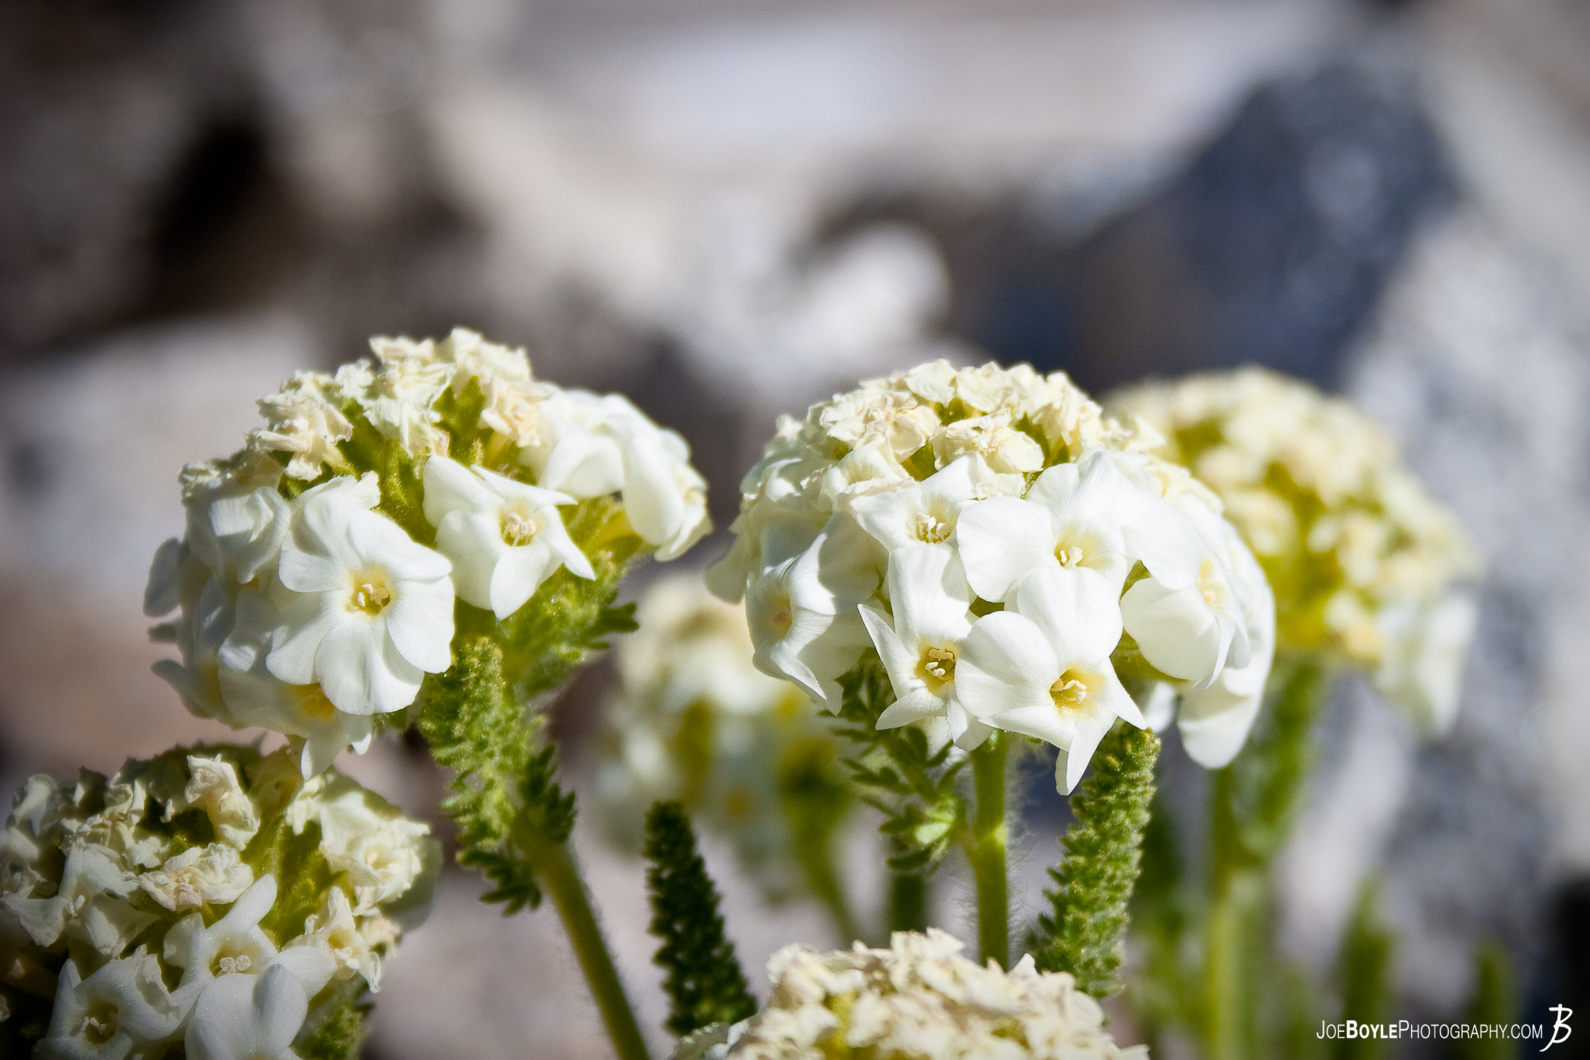  As I was hiking the JMT these white flowers would appear along the trail every now and then. 